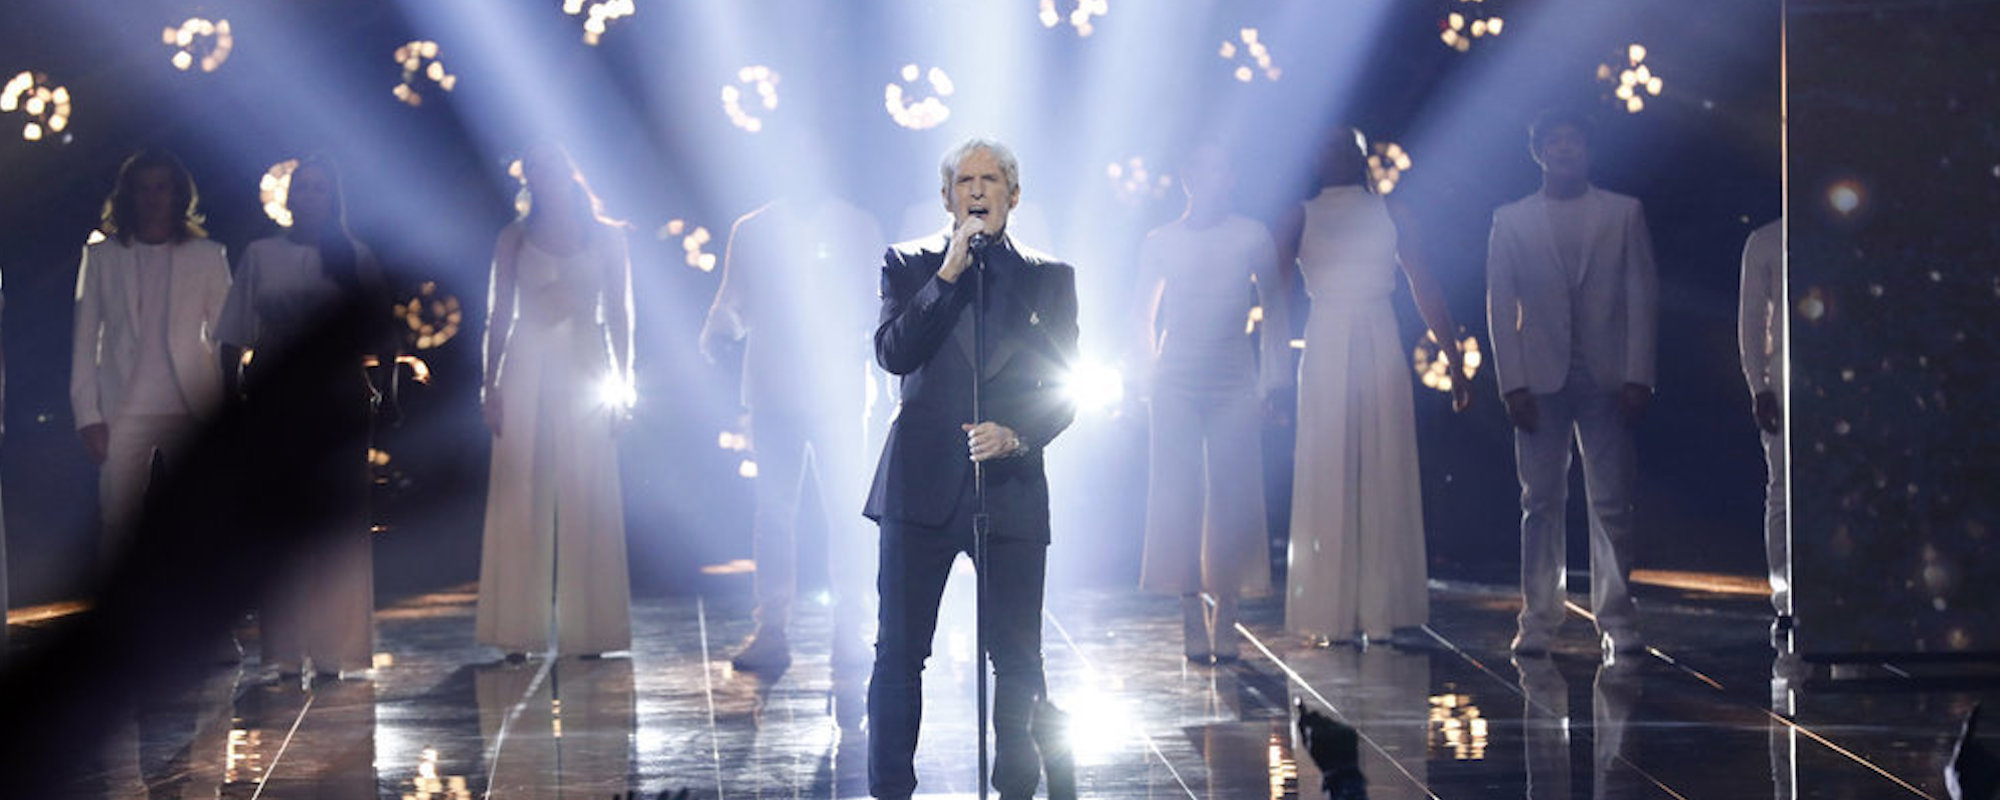 Michael Bolton Writes His Way Onto ‘American Song Contest’ with Original Song “Beautiful World”